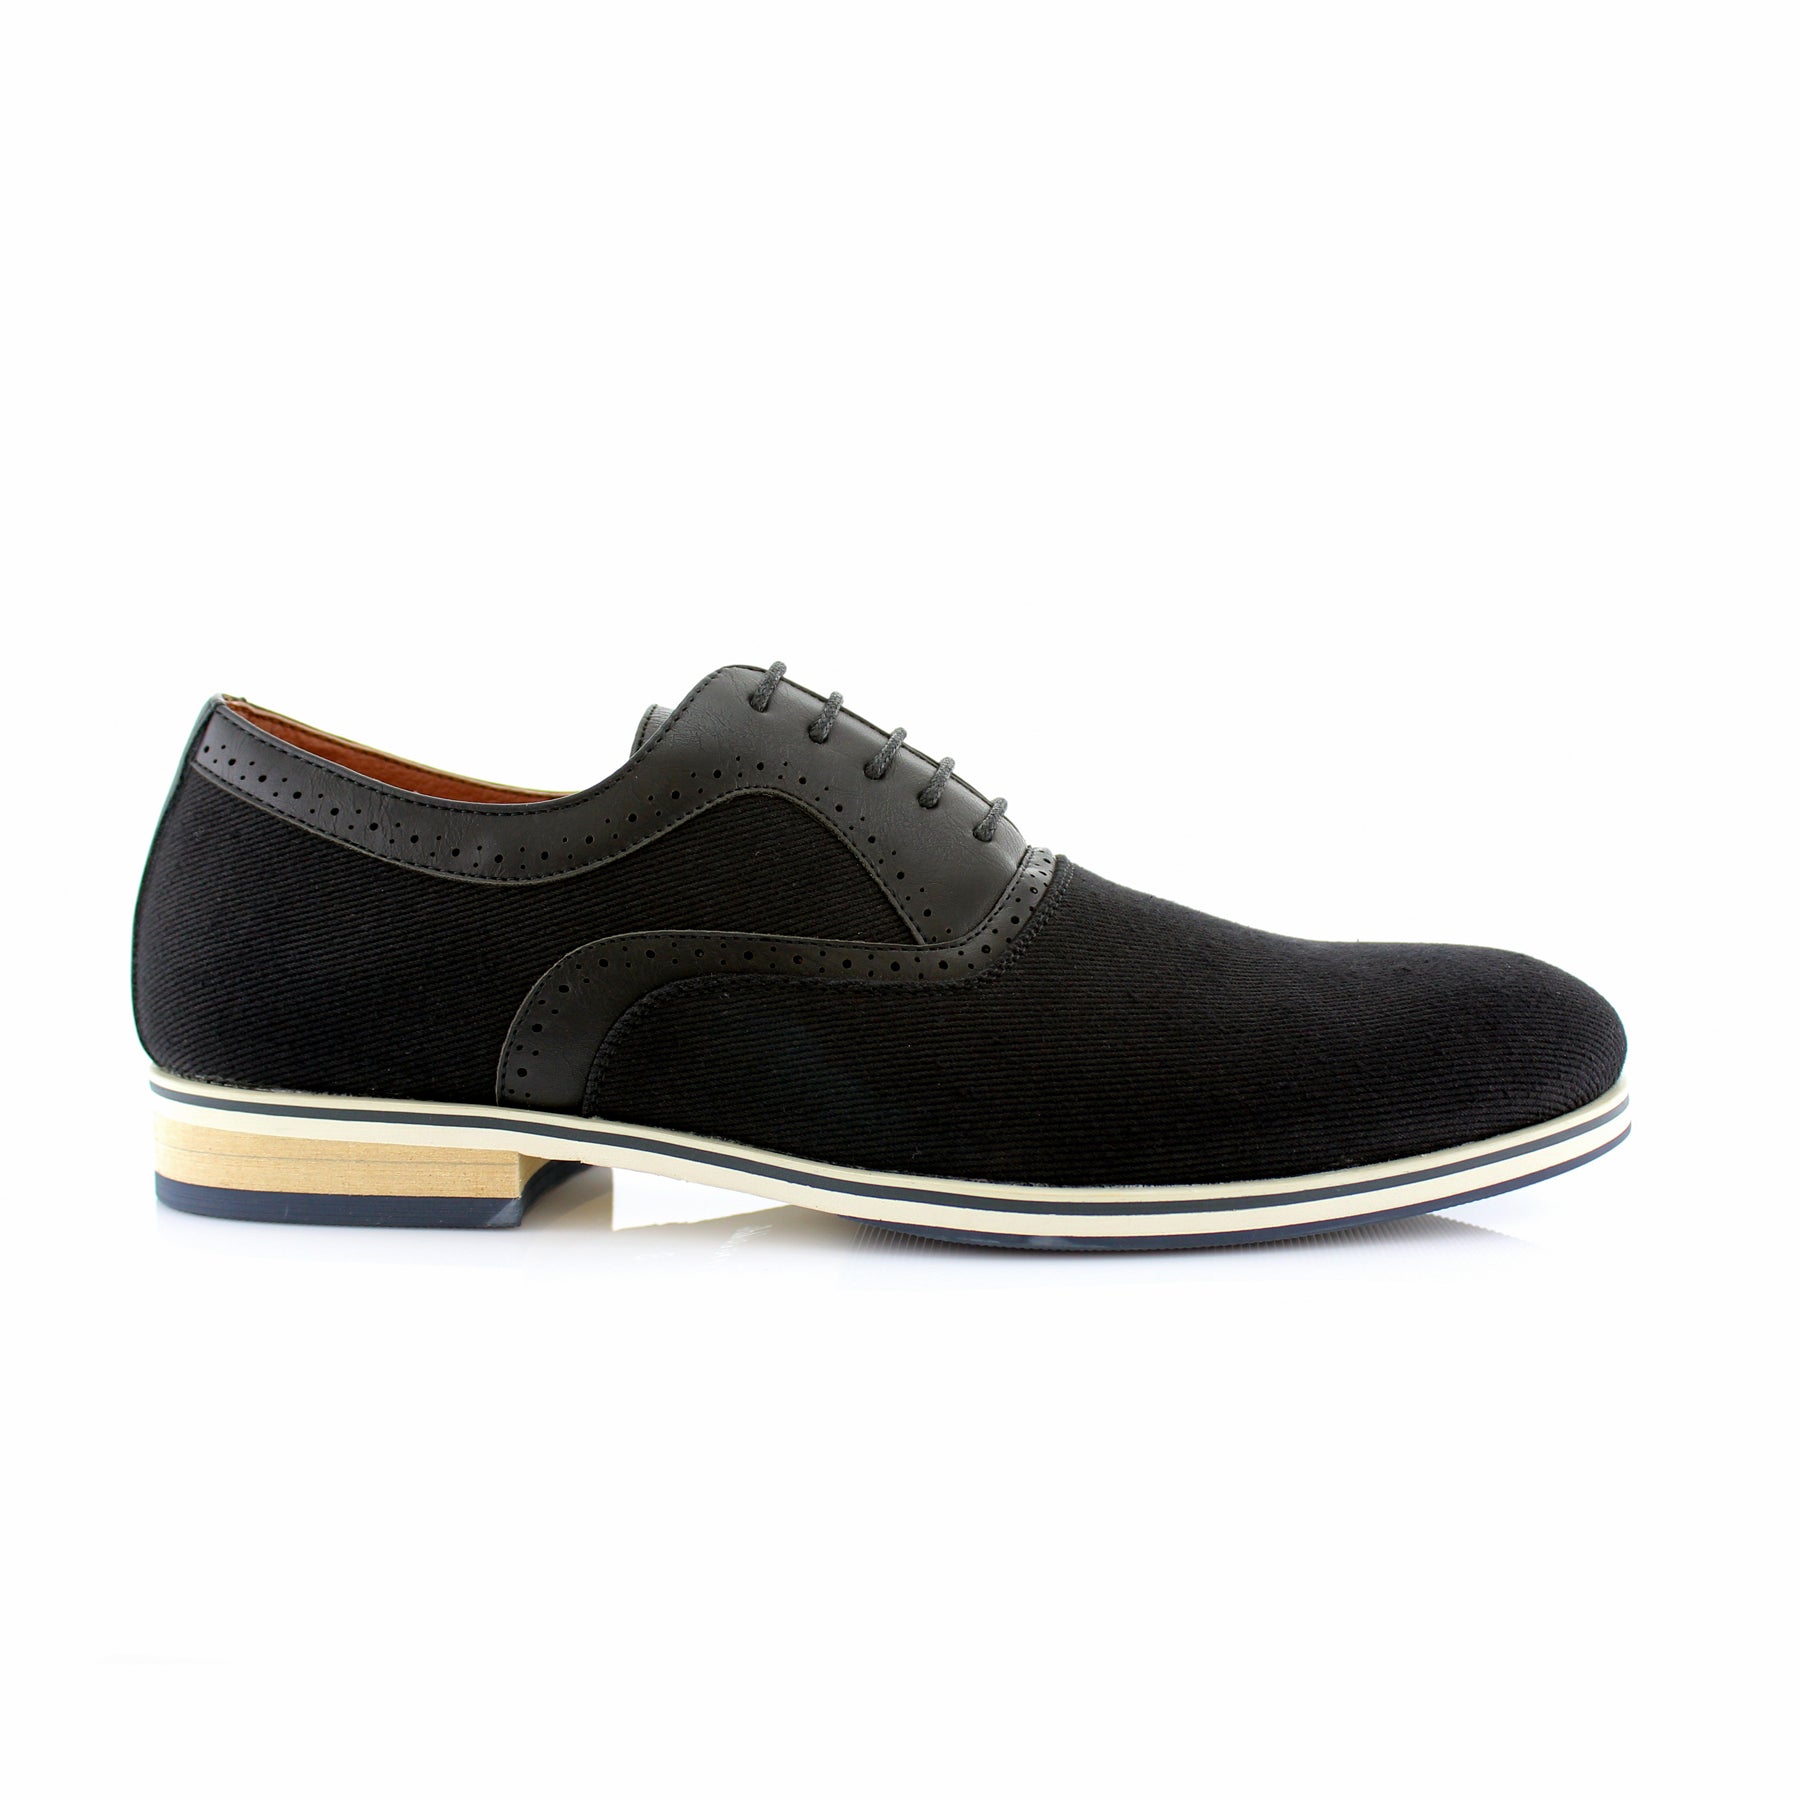 Duo-Textured Casual Oxfords | Edmonds by Ferro Aldo | Conal Footwear | Outer Side Angle View